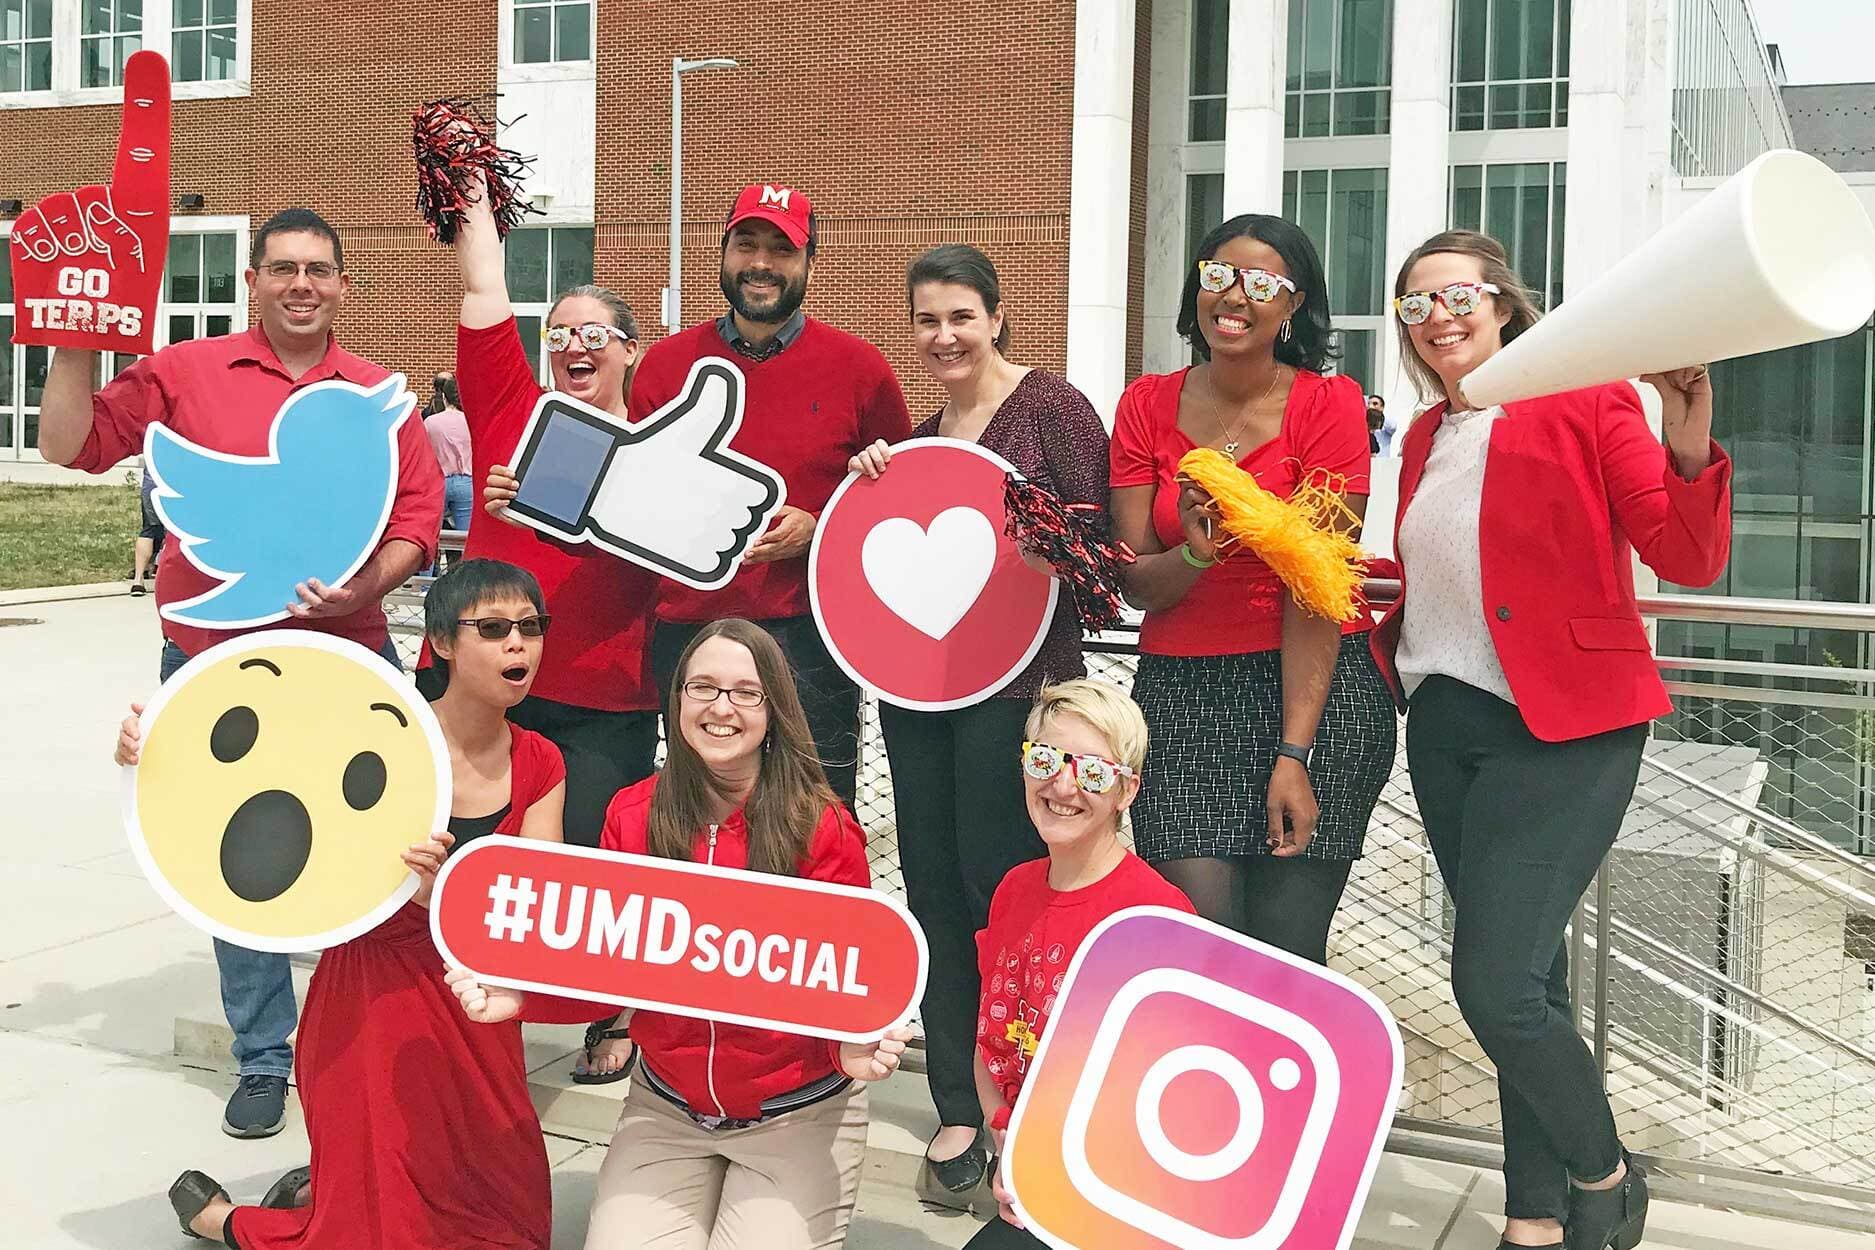 Group photo of #UMDSocial attendees all holding enlarged printed versions of social media related emojis like the facebook heart, twitter logo, and a megaphone graphic.